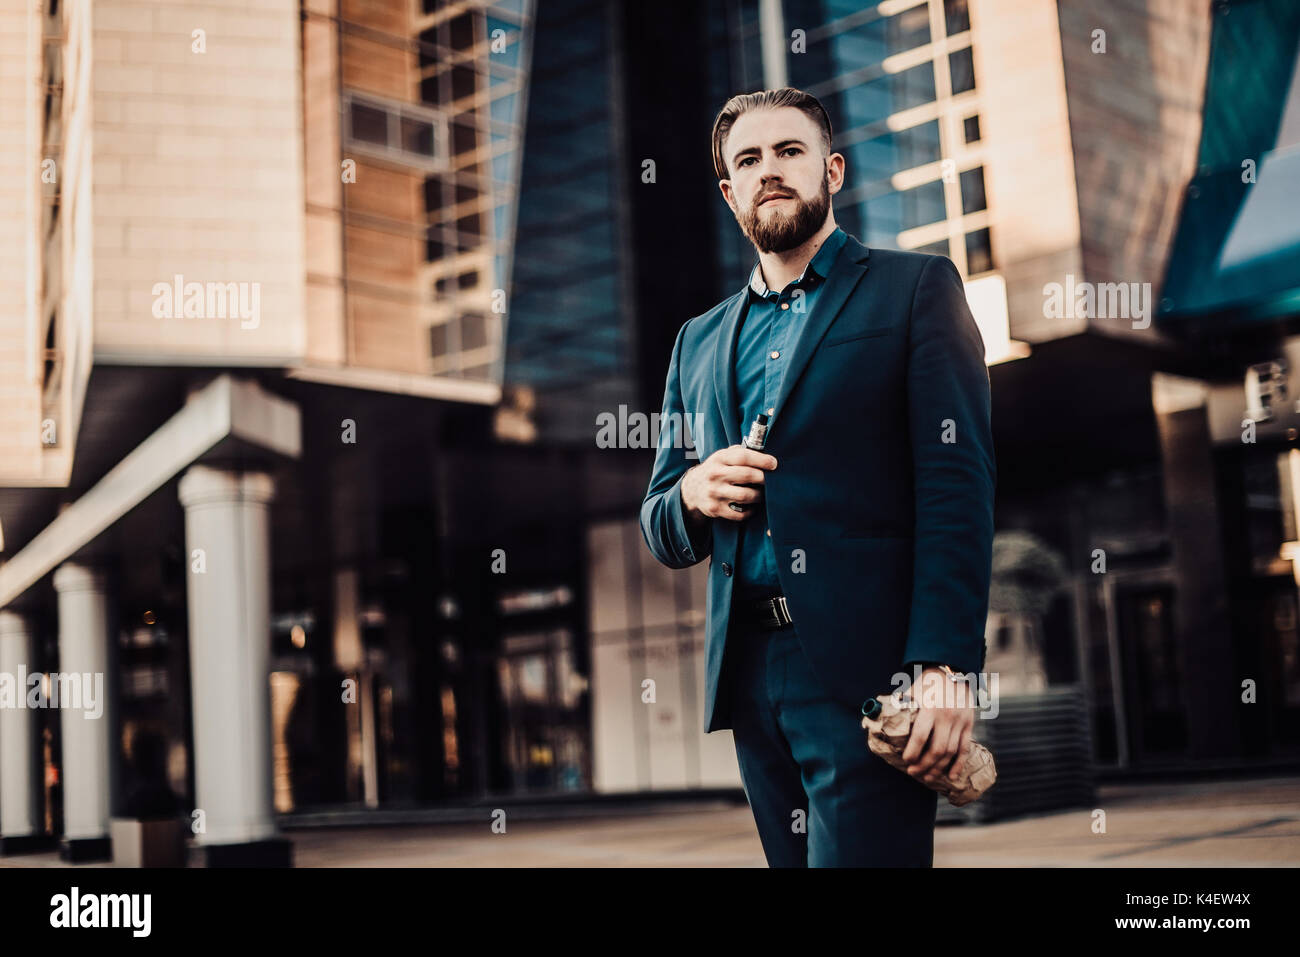 bearded man in a suit in the urban landscape with a bottle of something Stock Photo